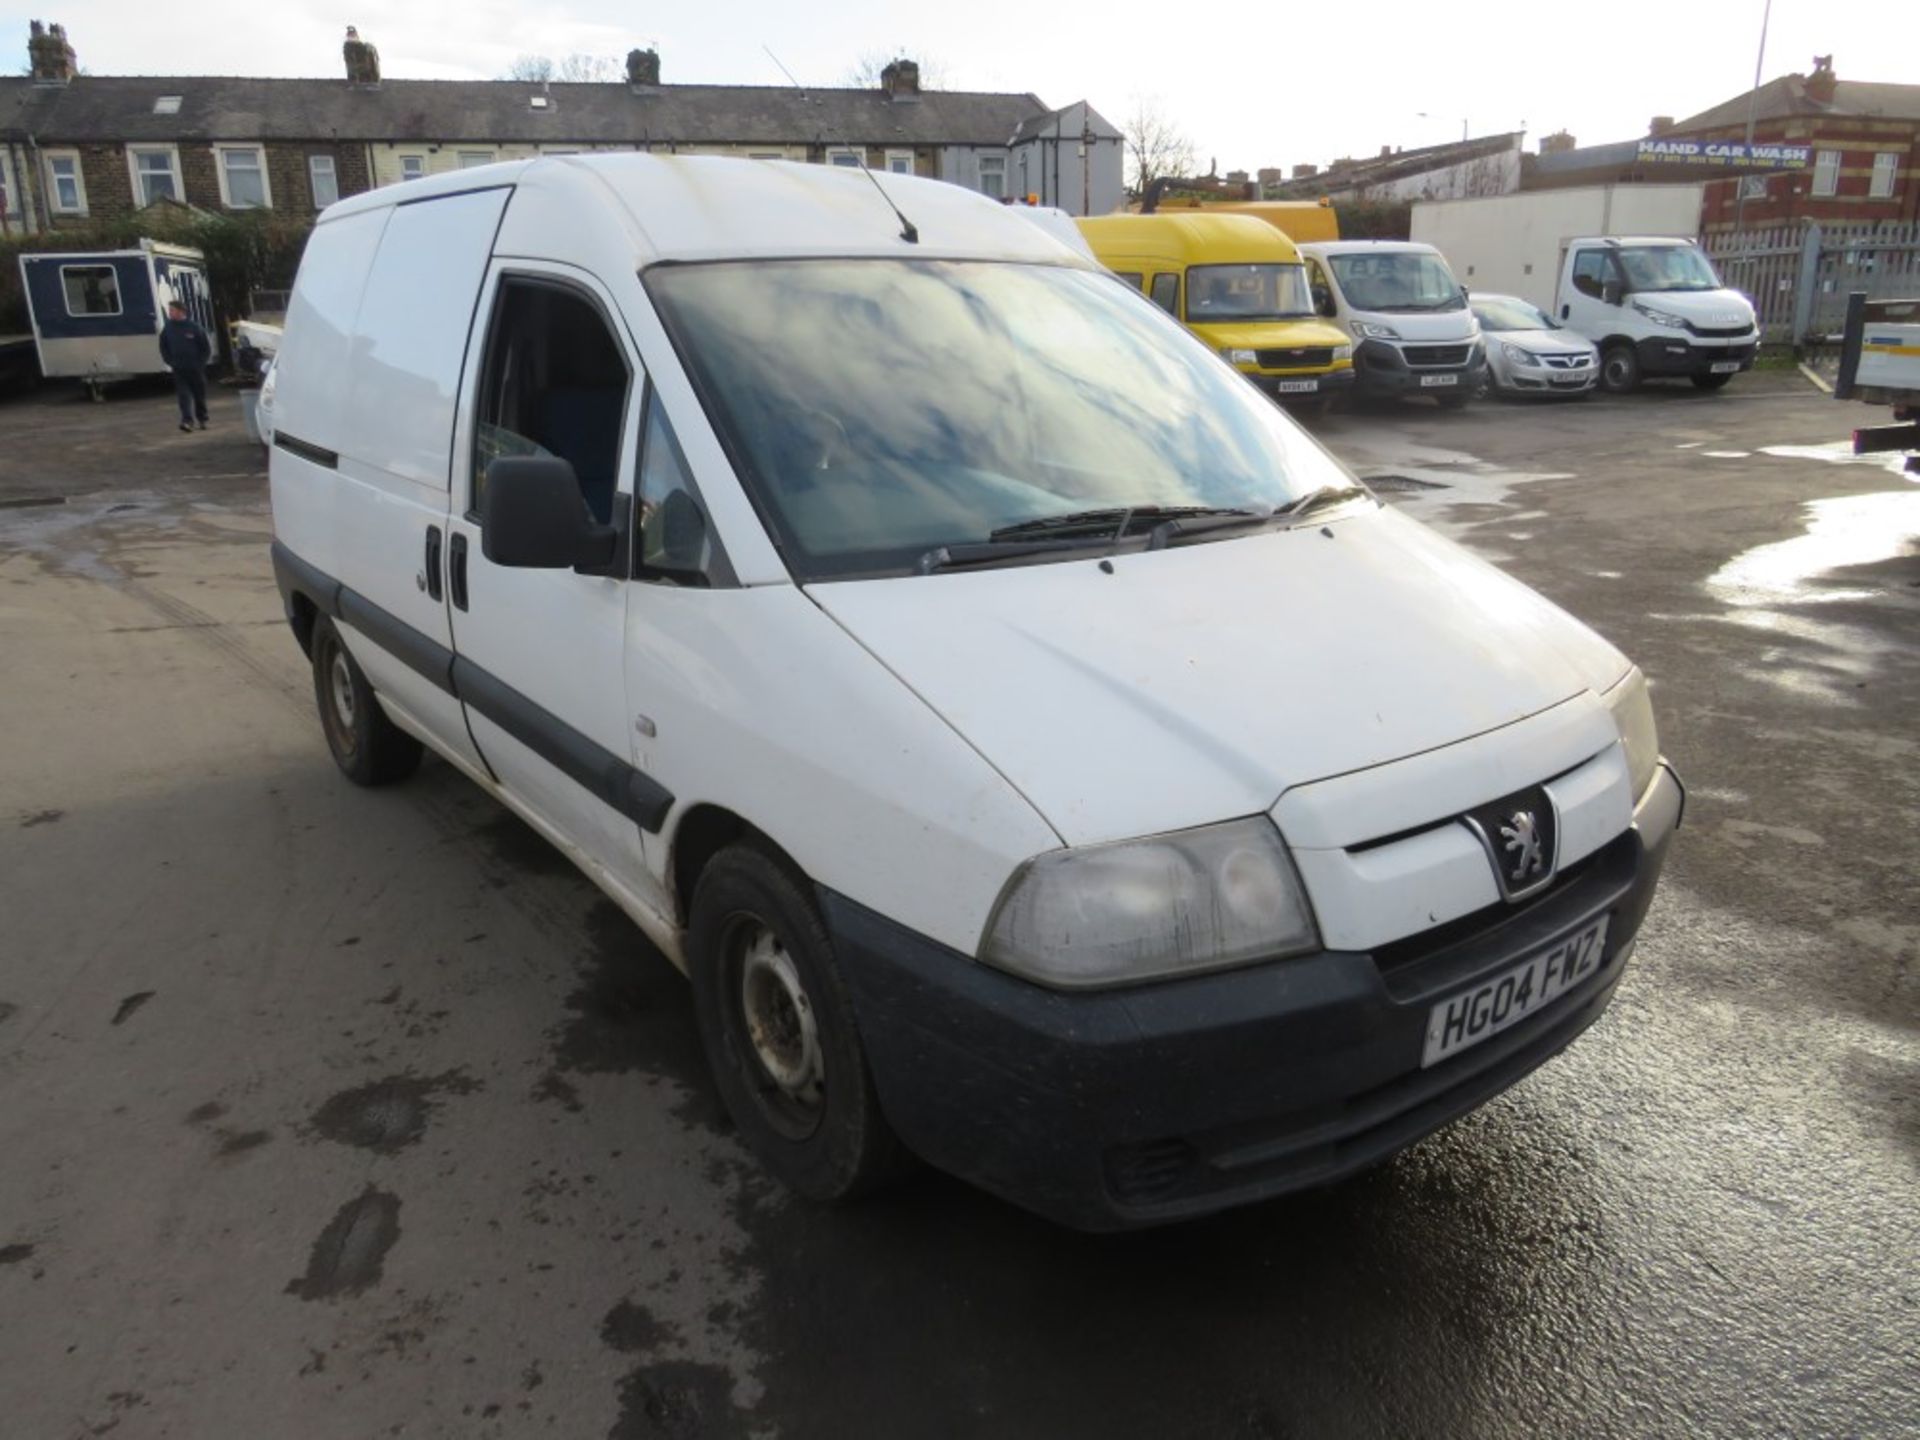 04 reg PEUGEOT EXPERT 900 HDI, 1ST REG 03/04, 164424M NOT WARRANTED, V5 HERE, 8 FORMER KEEPERS [+